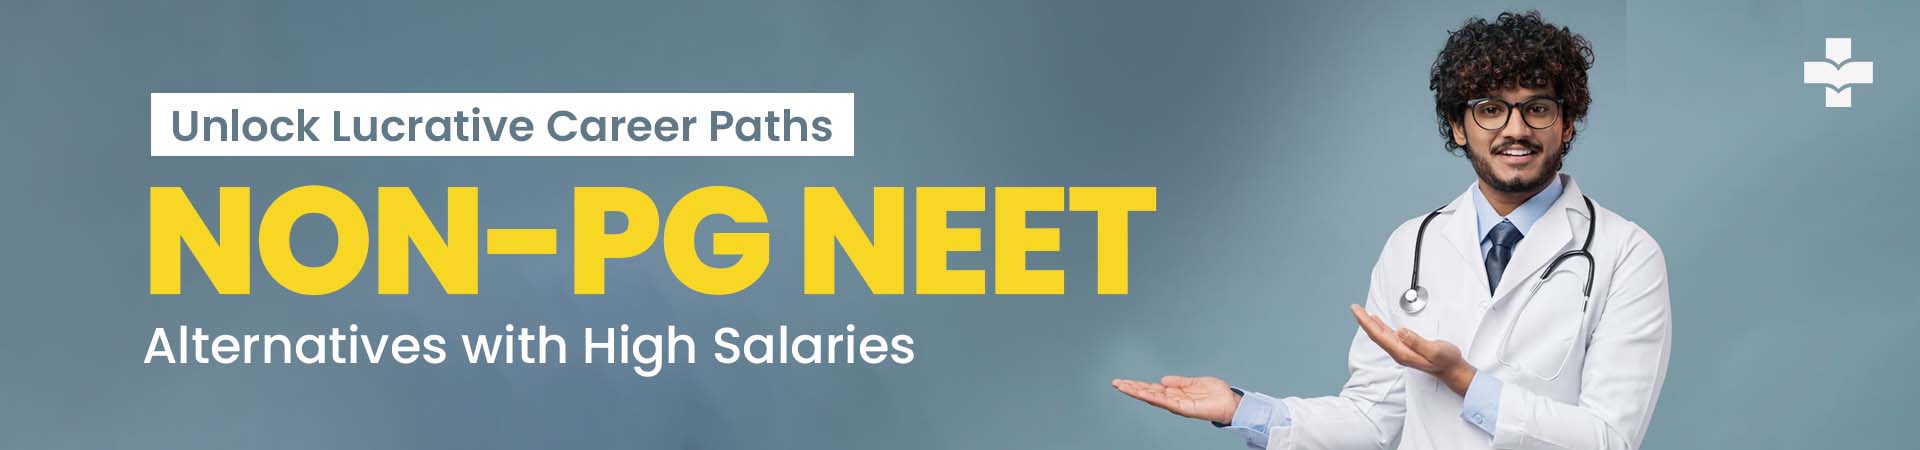 Discover lucrative medical career paths without the need for PG NEET. Explore high-paying options available for medical professionals in various specialties.